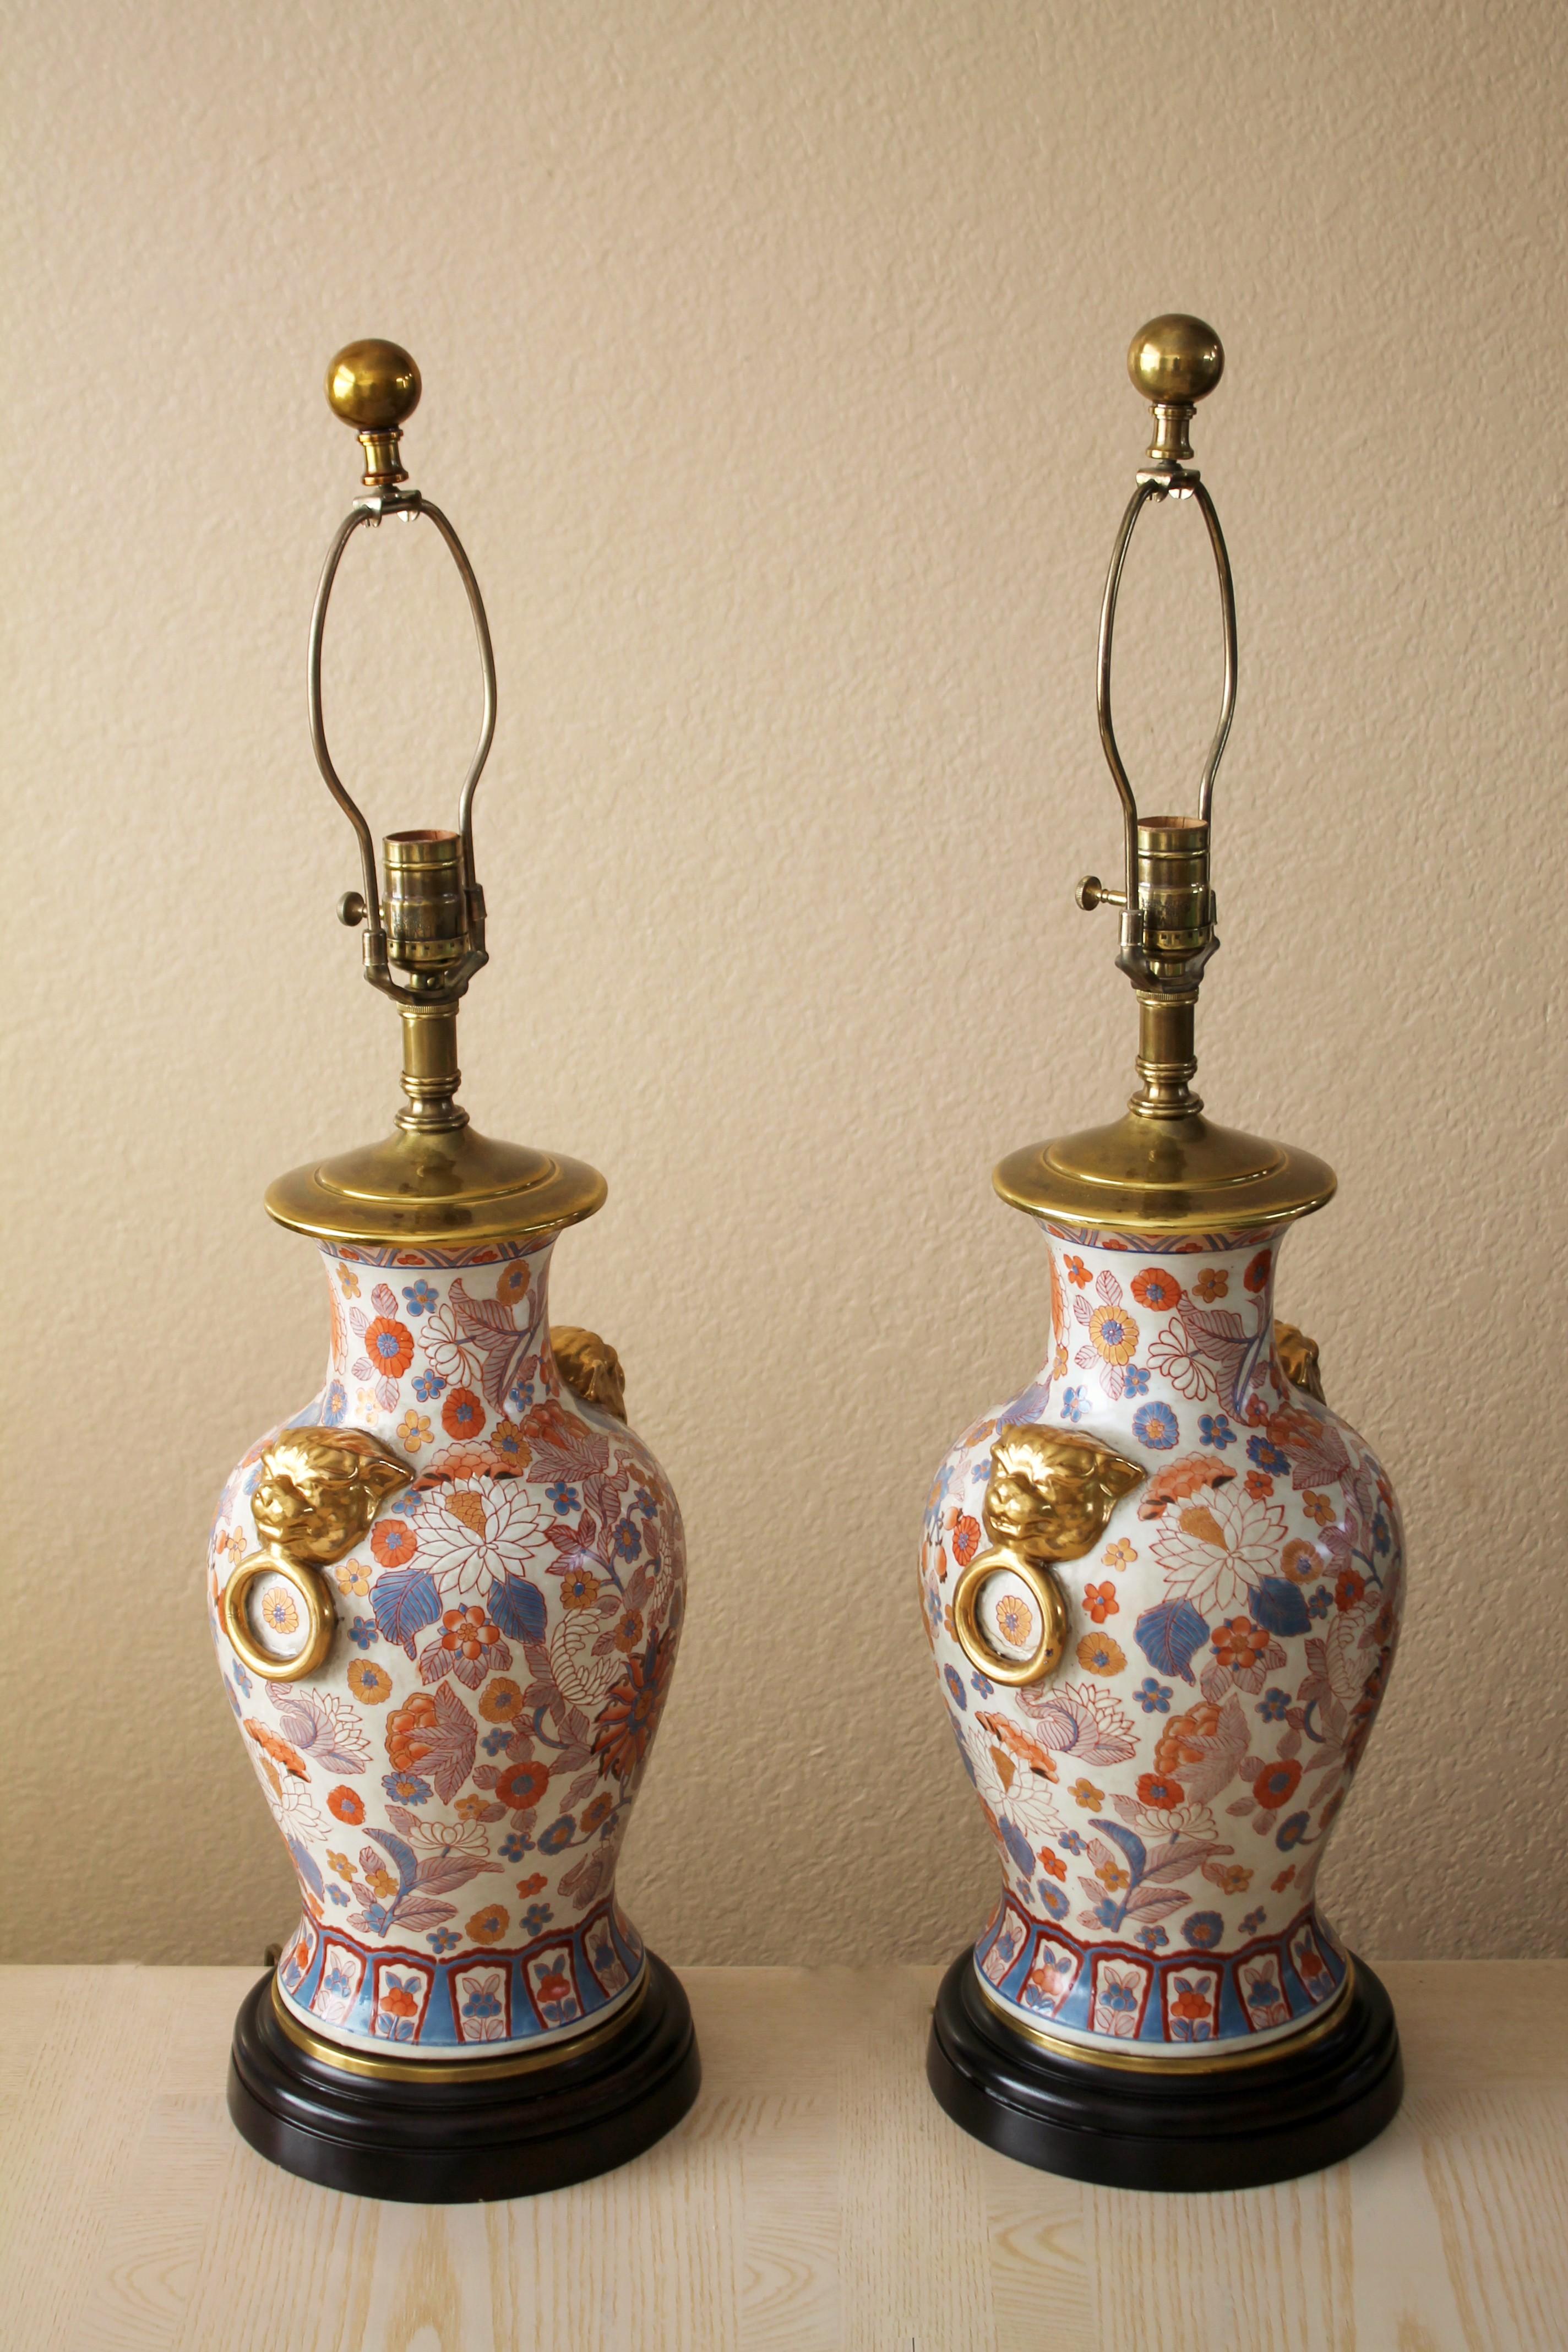 Decorator Delight!

PAIR!
Frederick Cooper
Chinoiserie Table Lamps
Brass, Ormolu & Porcelain

Wow! What an exquisite and elegant pair of Frederick Cooper lamps! Delightful from top to bottom, these are a decorator's dream!  Gorgeous floral motif and